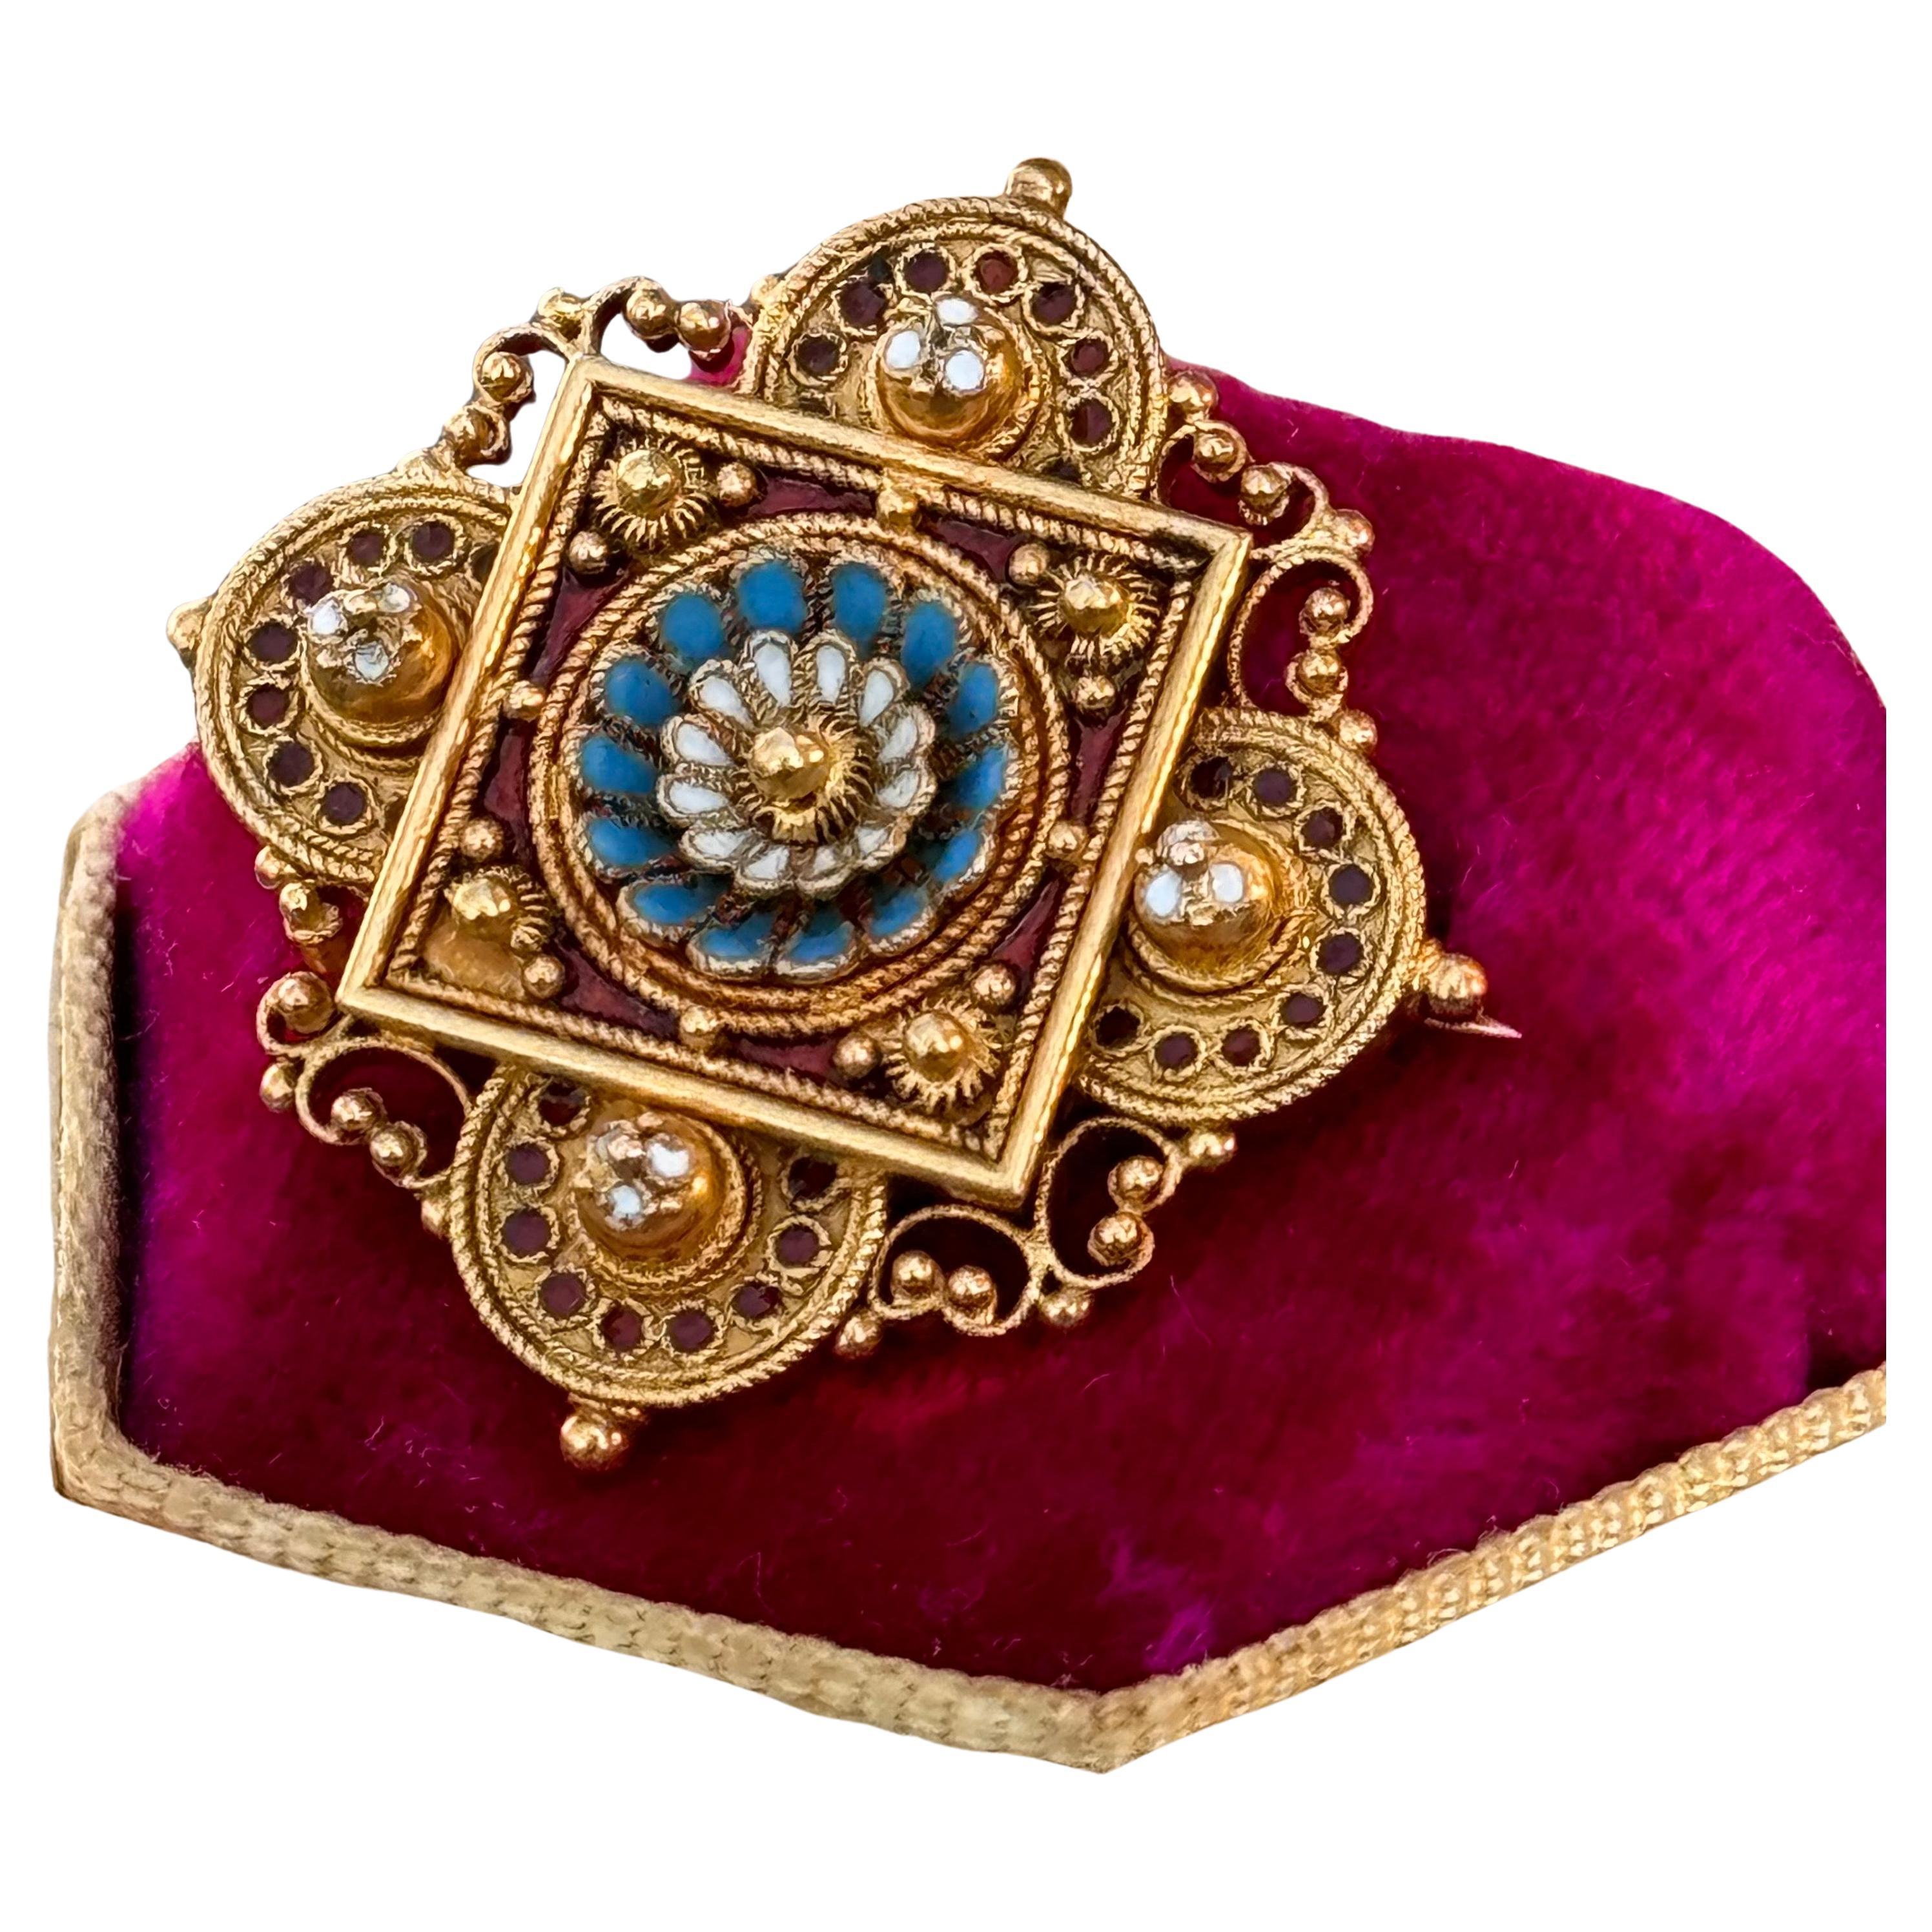 Antique Archaeological  Victorian Etruscan revival pin /brooch with beautiful details . Pin front features exceptional  quality of the granulation and filigree wirework with enamel work in between (enamel is in red ,turquoise blue and red color)